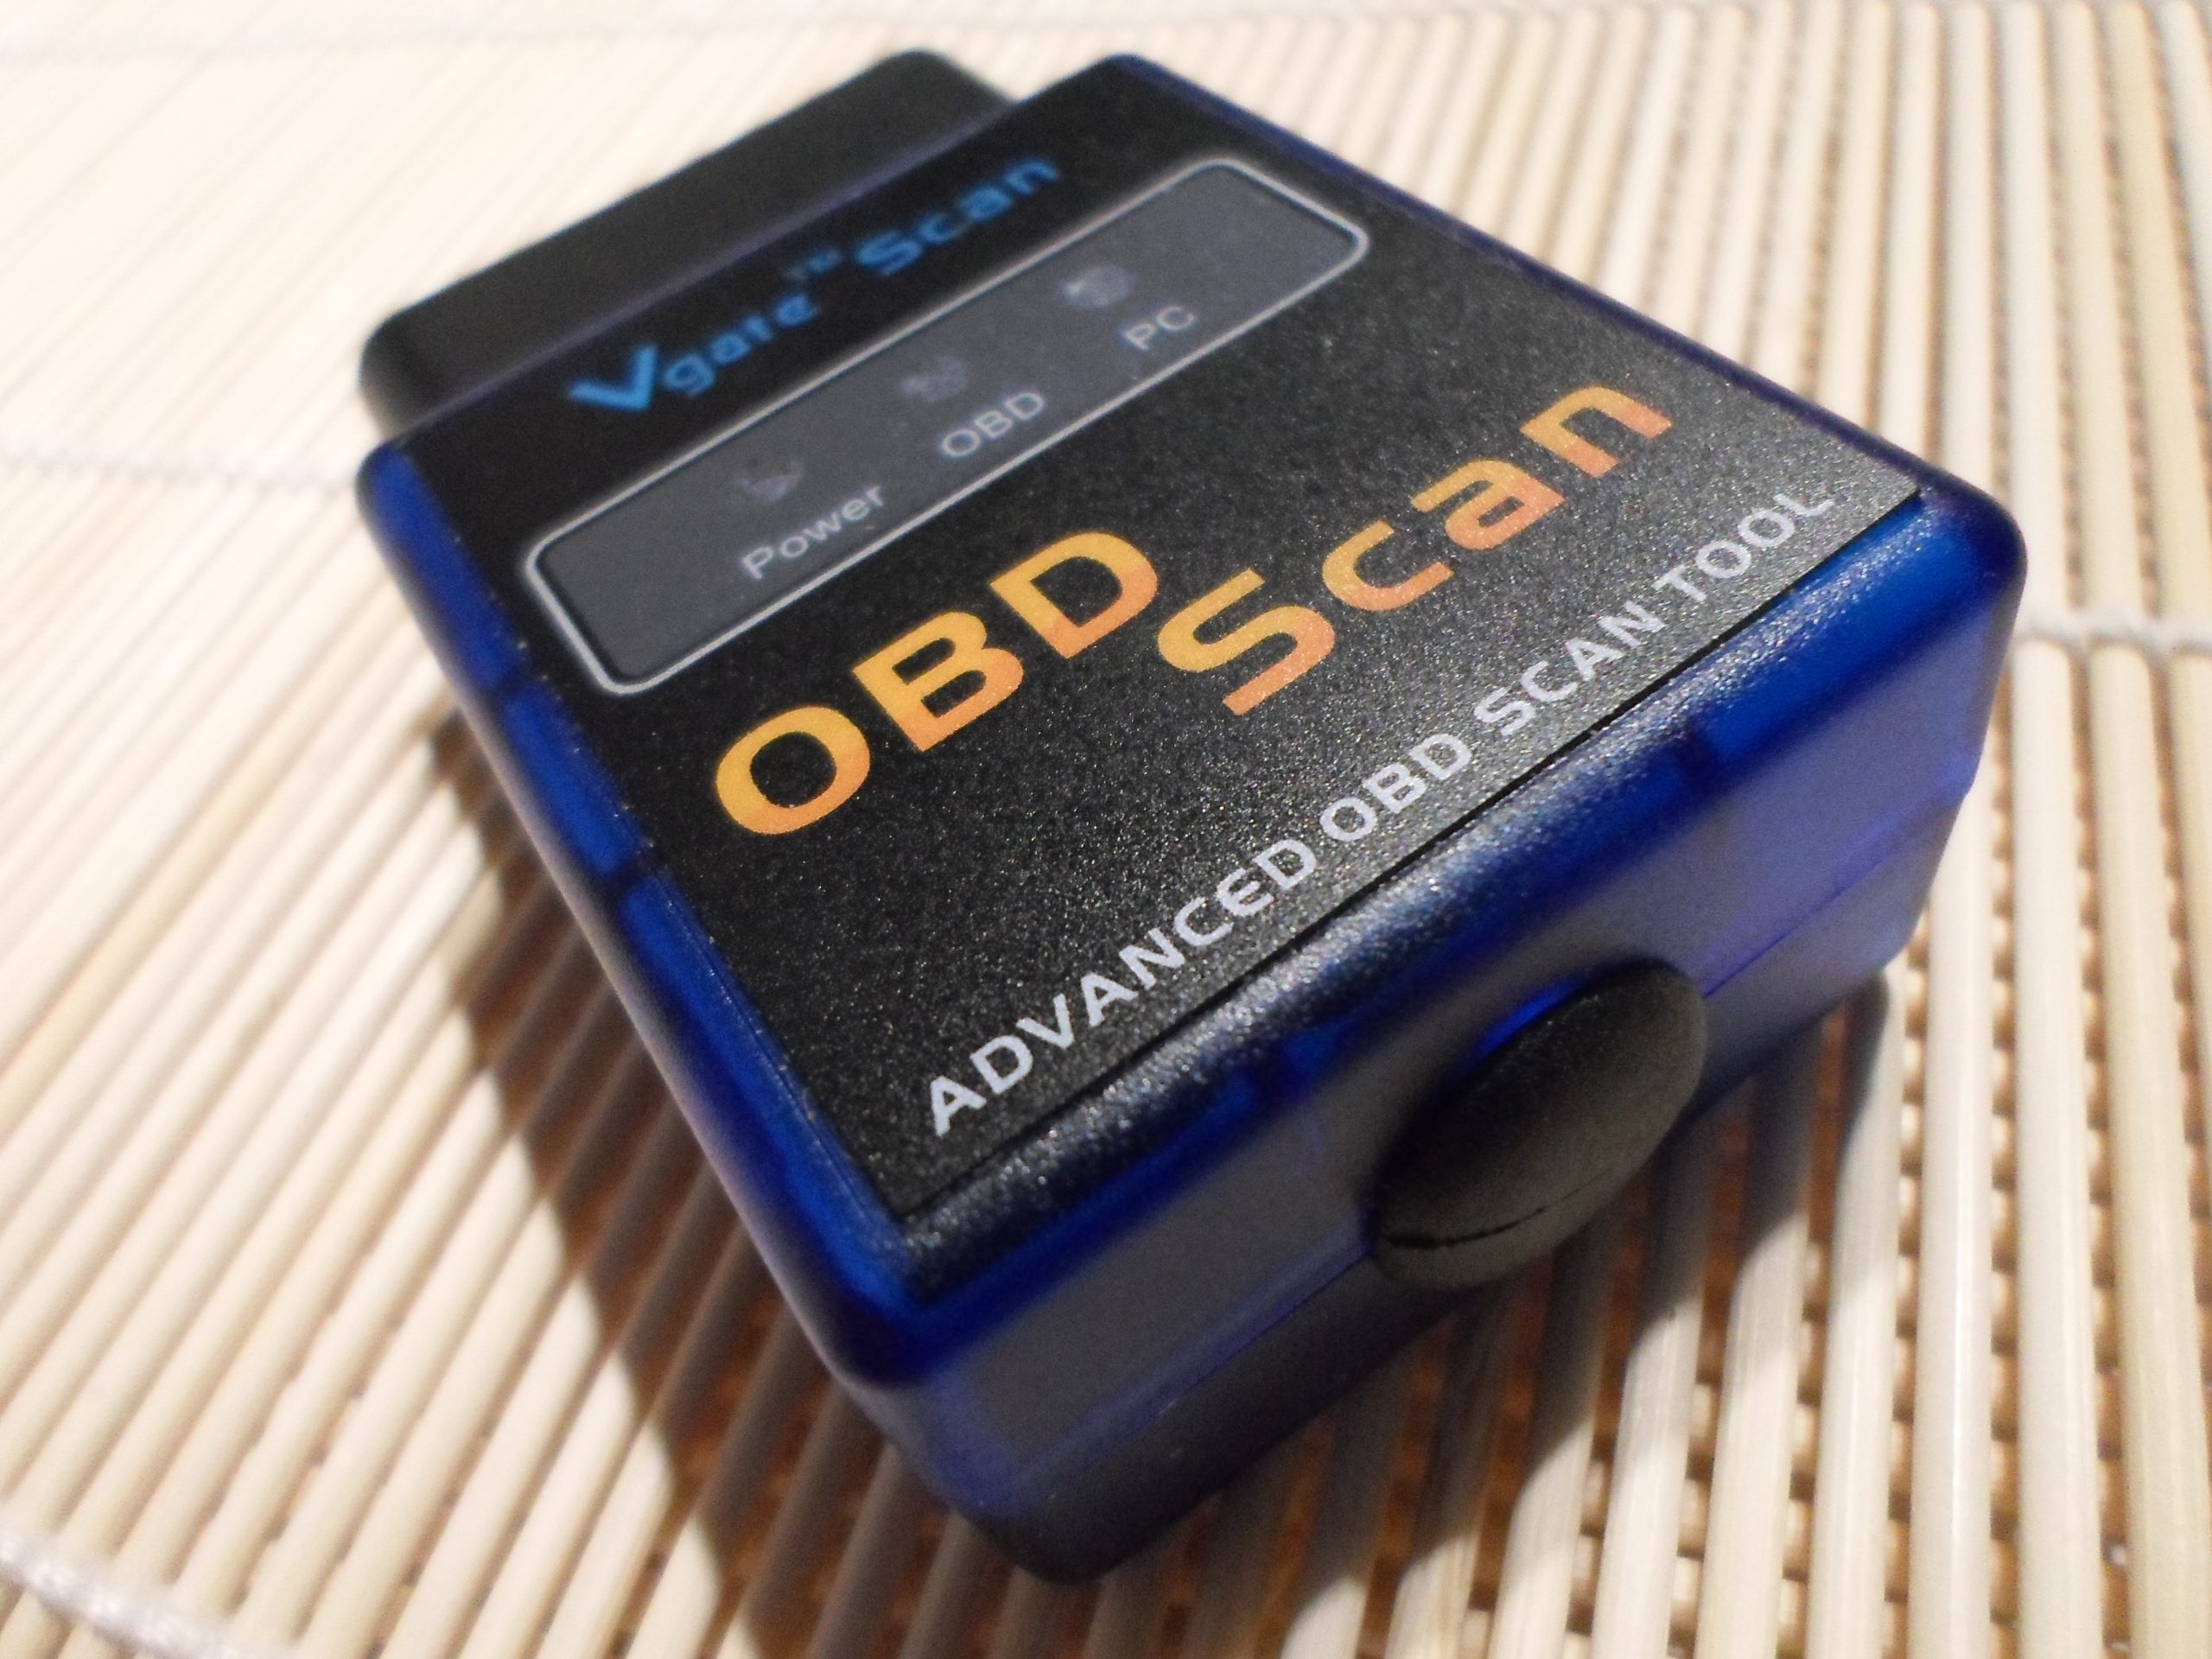 an OBD 2 scanner that uses bluetooth